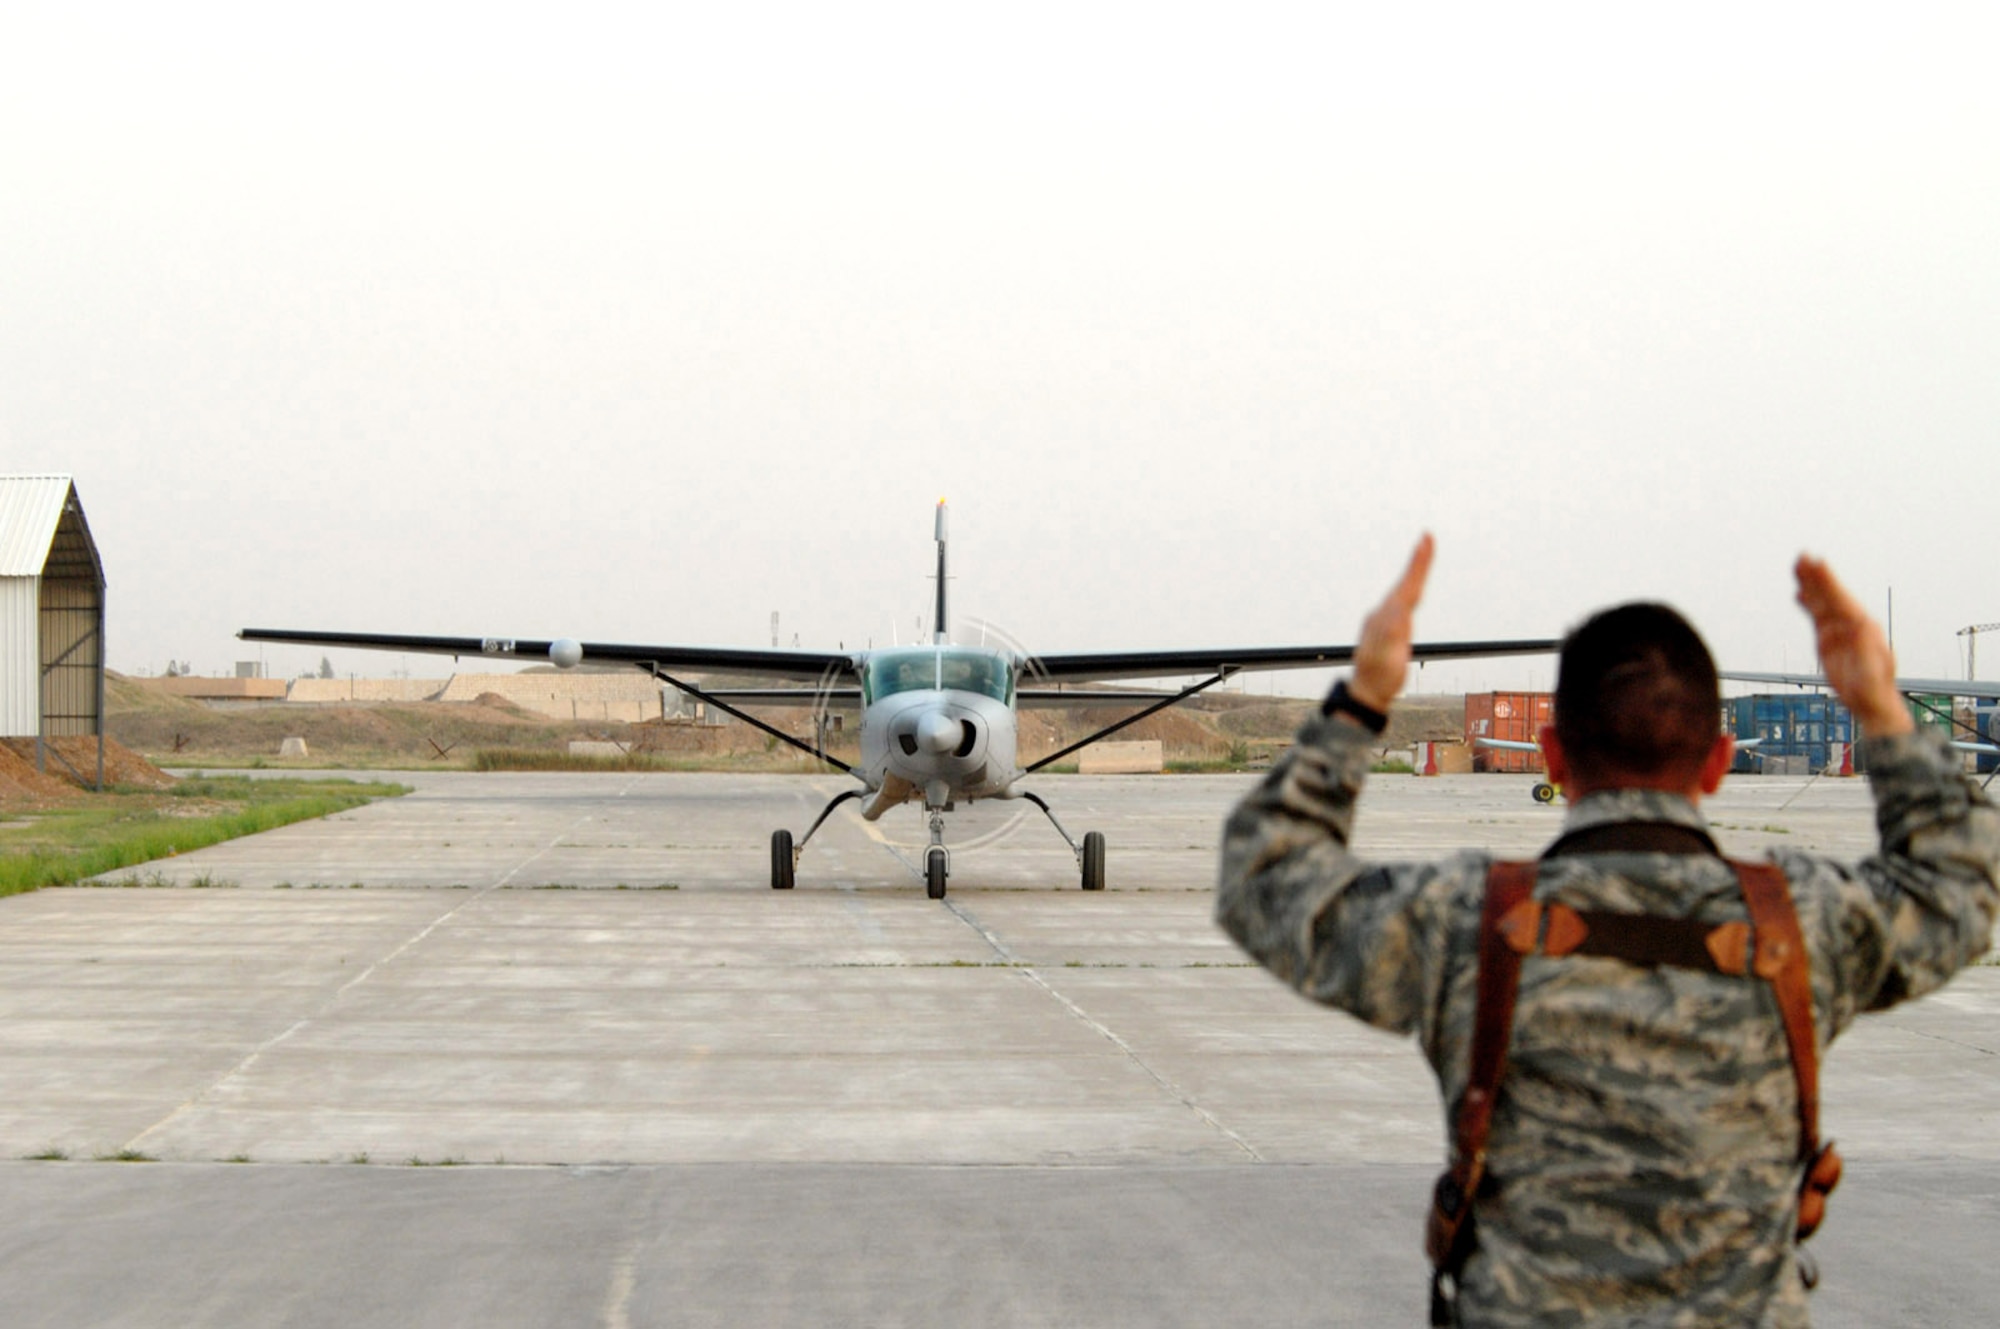 The Iraqi air force's newest Cessna 208 Caravan lands at the Iraqi Flying Training Wing for the first-time March 29 at Kirkuk Air Base, Iraq. The Cessna 208 is the most advanced fixed wing training aircraft for the Iraqi Flying Training Wing. Iraqi students spend approximately six months learning to fly the Cessna 208 and receive pilot wings upon completion of the training syllabus. They then move onto the Iraqi air force's operational aircraft which includes the C-208, King Air, C-130 Hercules or SAMA (Zenair) CH-2000. The Iraqi Air Force Flying Training Wing inventory will have a total of five Cessna 208s by the end of 2008. (U.S. Air Force/Senior Master Sgt. Don Senger) 